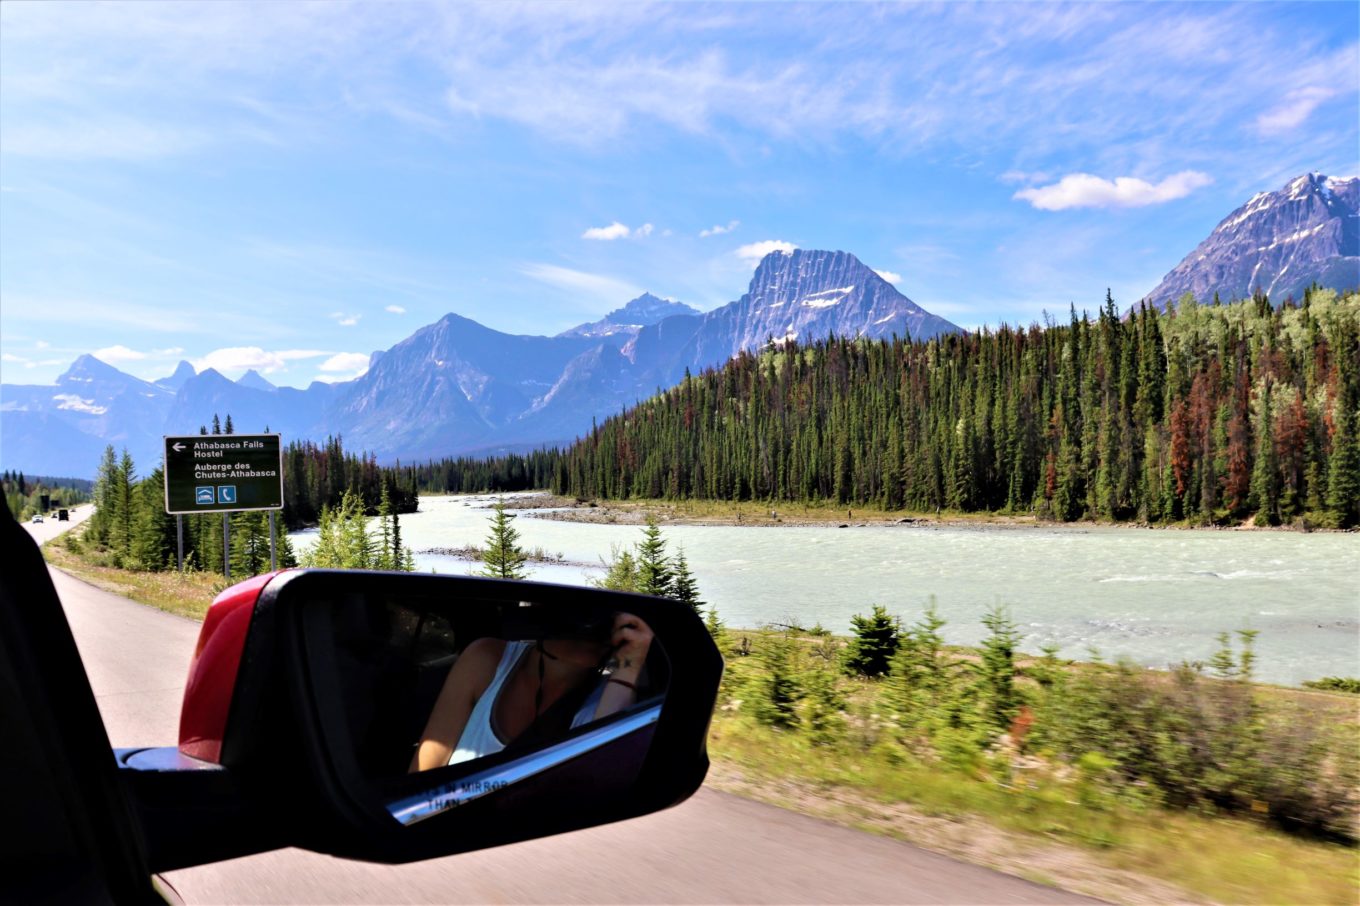 7 day road trip from vancouver to calgary